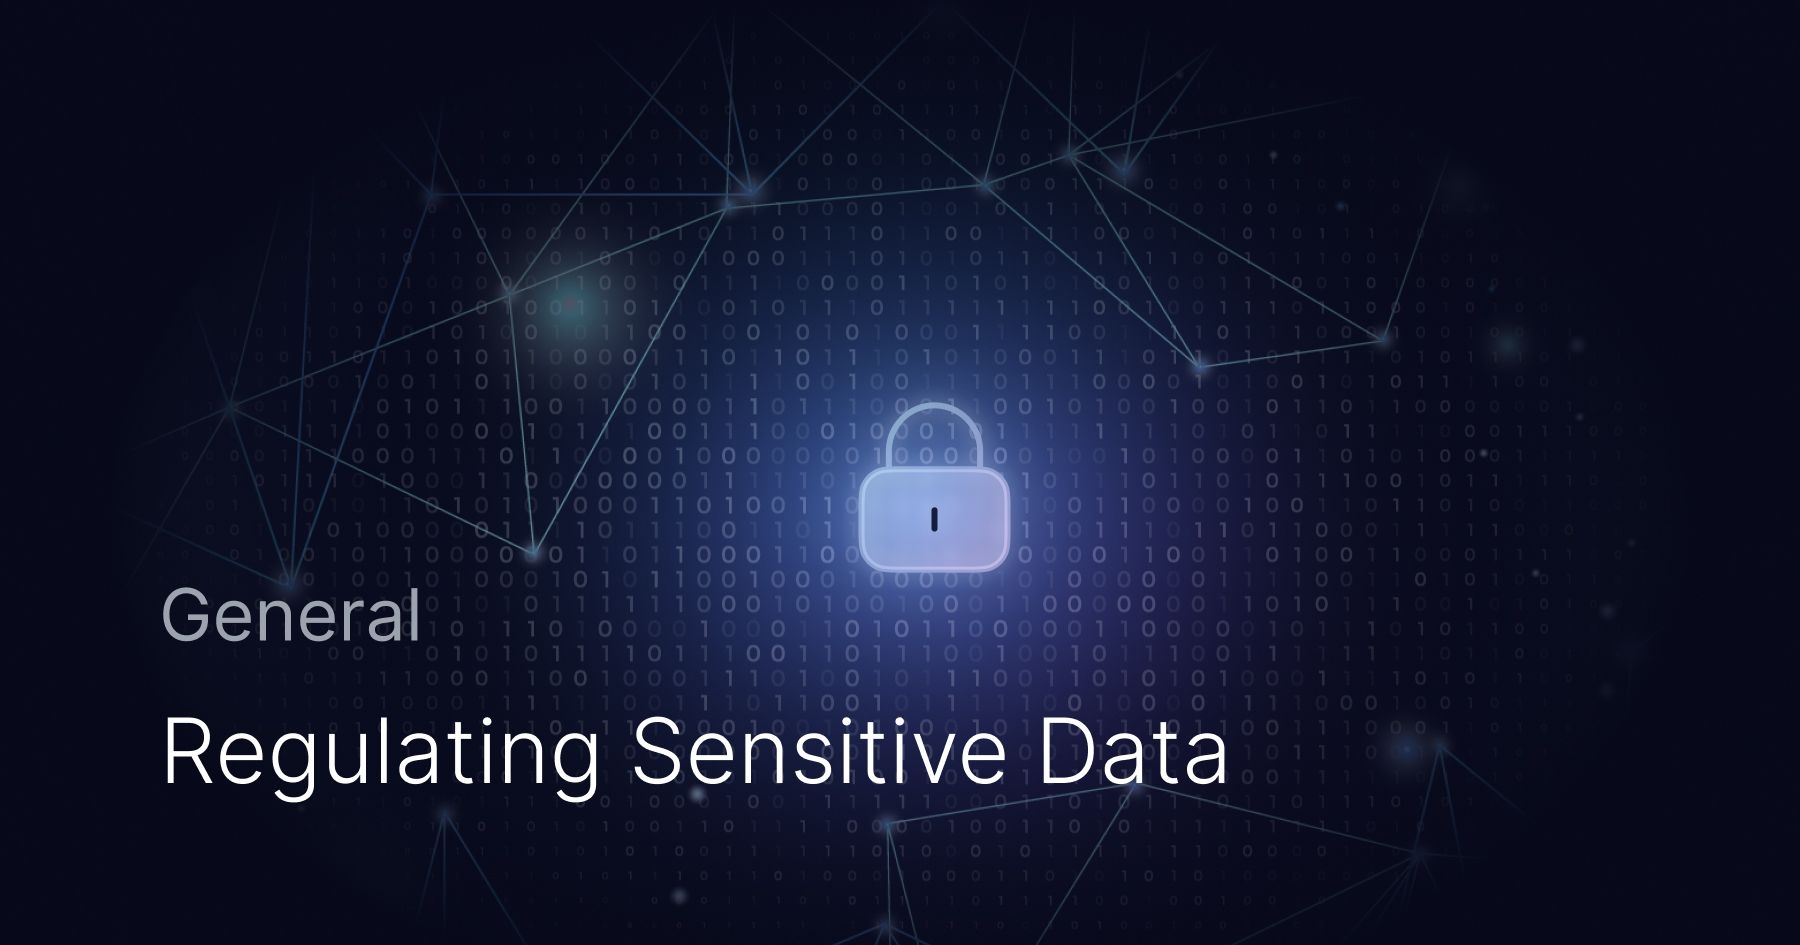 What is Sensitive Data and Why it needs to be Regulated?